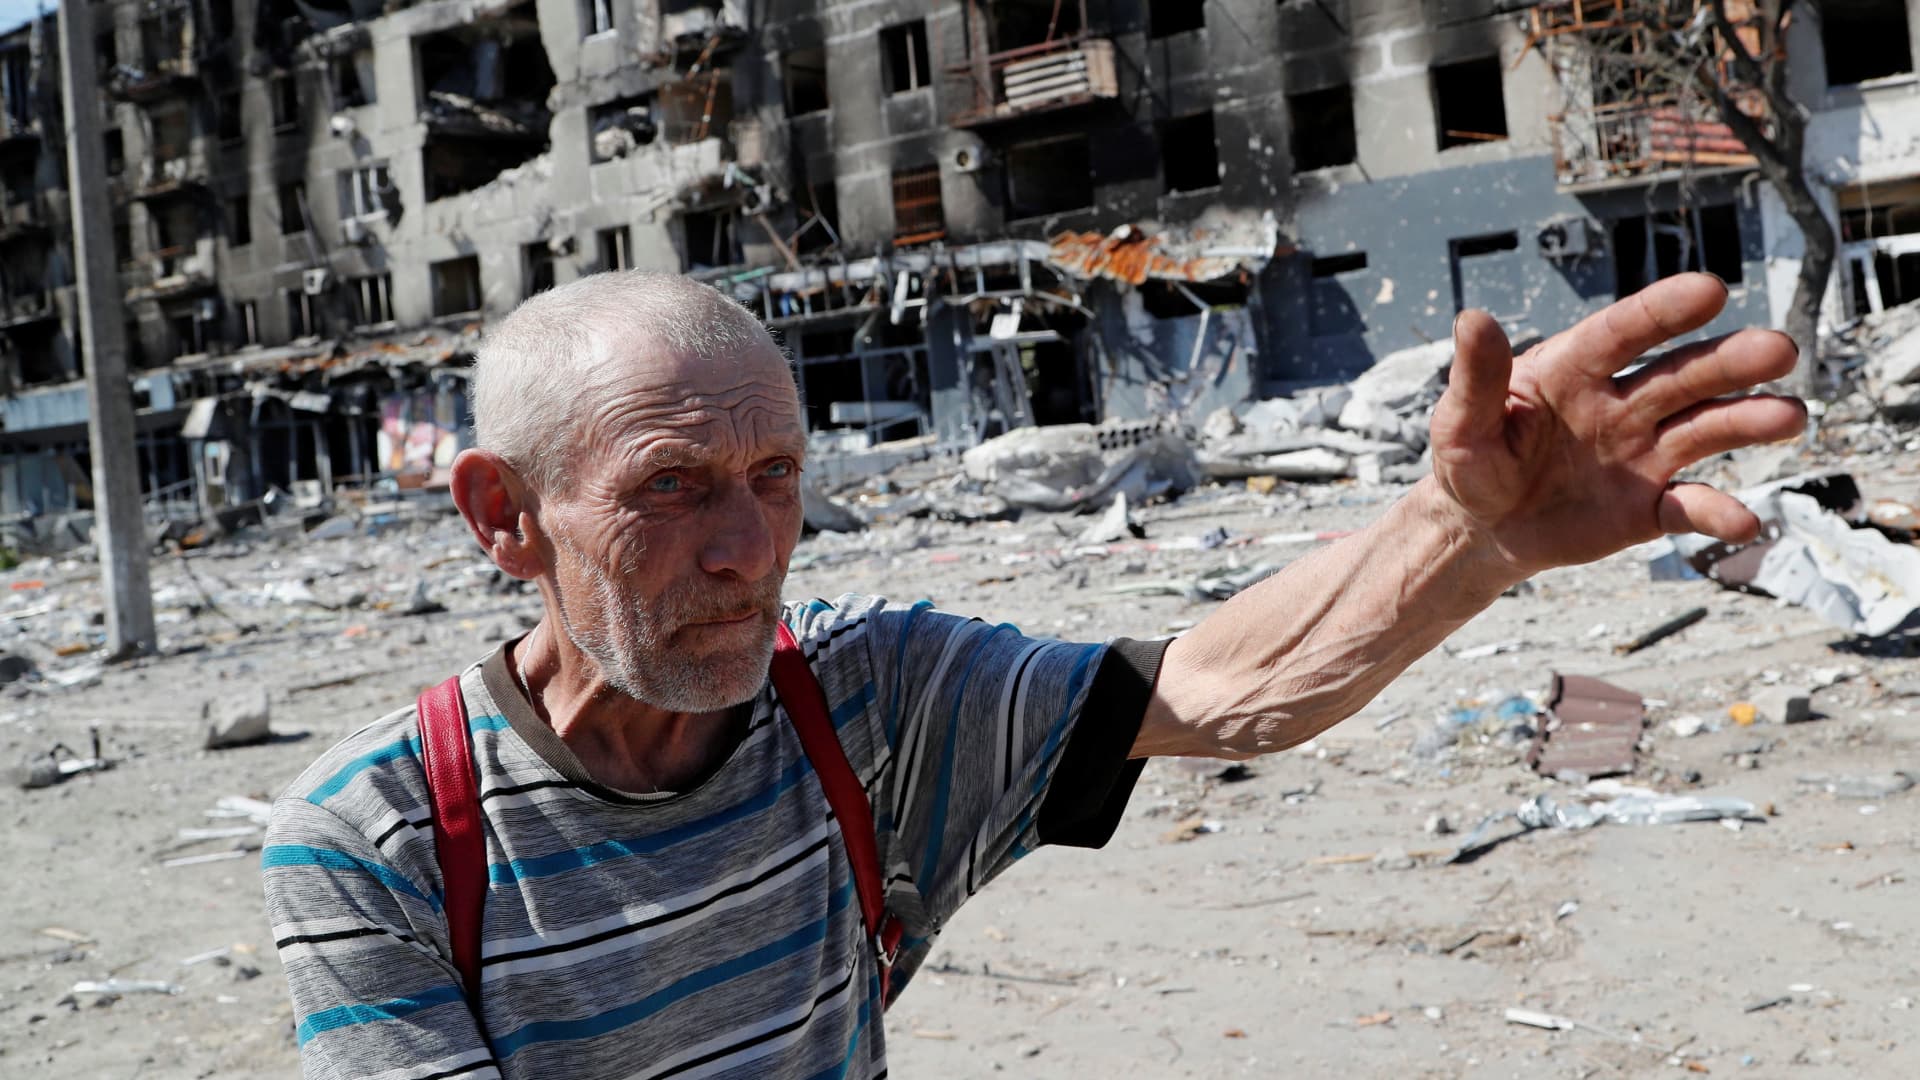 Local resident Vitaly Kudasov, 71, gestures as he speaks near an apartment building destroyed during Ukraine-Russia conflict in the southern port city of Mariupol, Ukraine April 28, 2022.